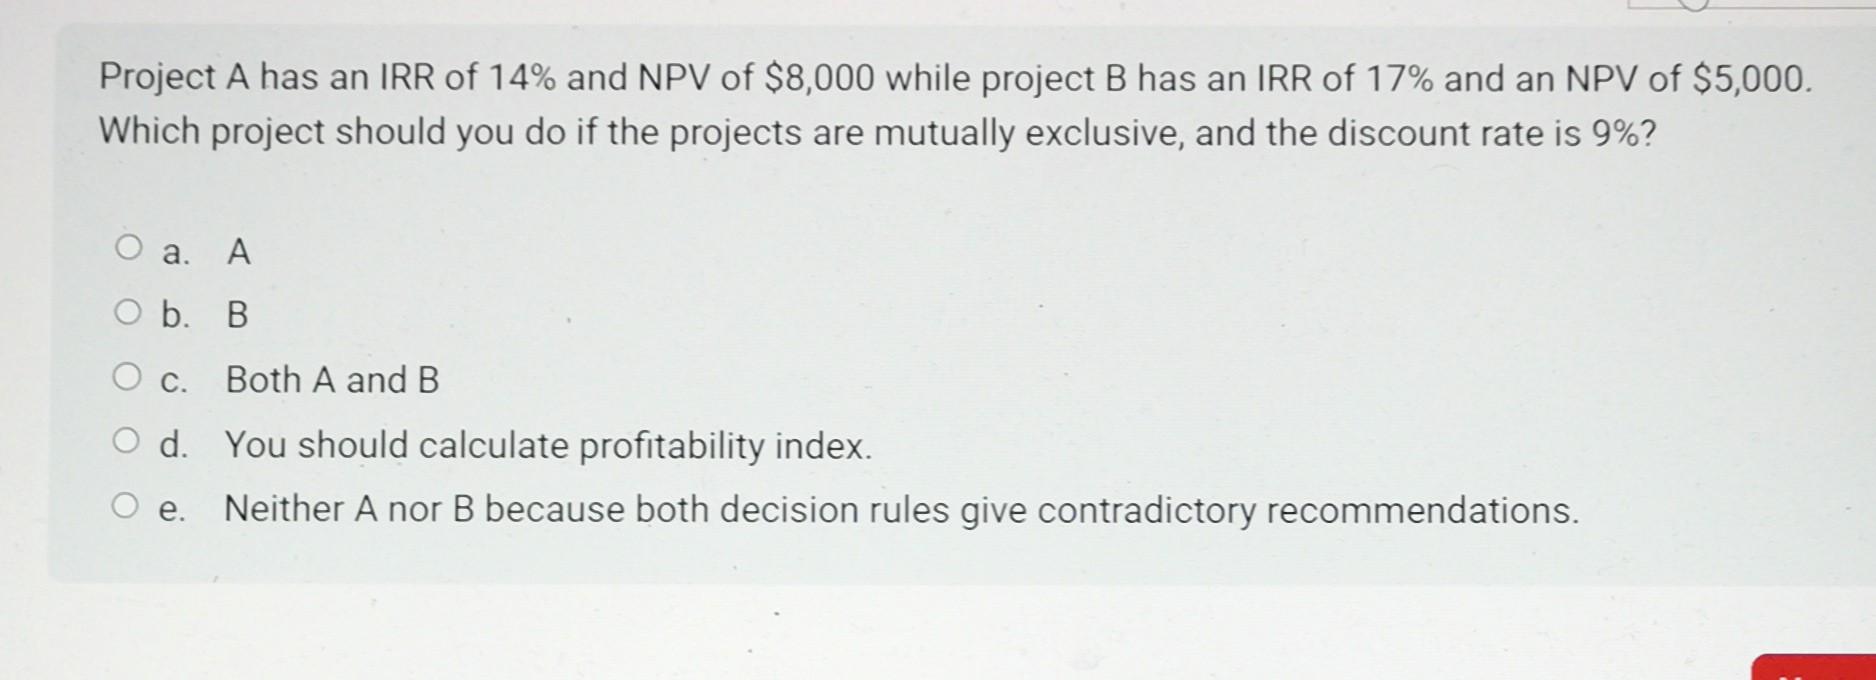 Project A has an IRR of 14% and NPV of $8,000 while project B has an IRR of 17% and an NPV of $5,000. Which